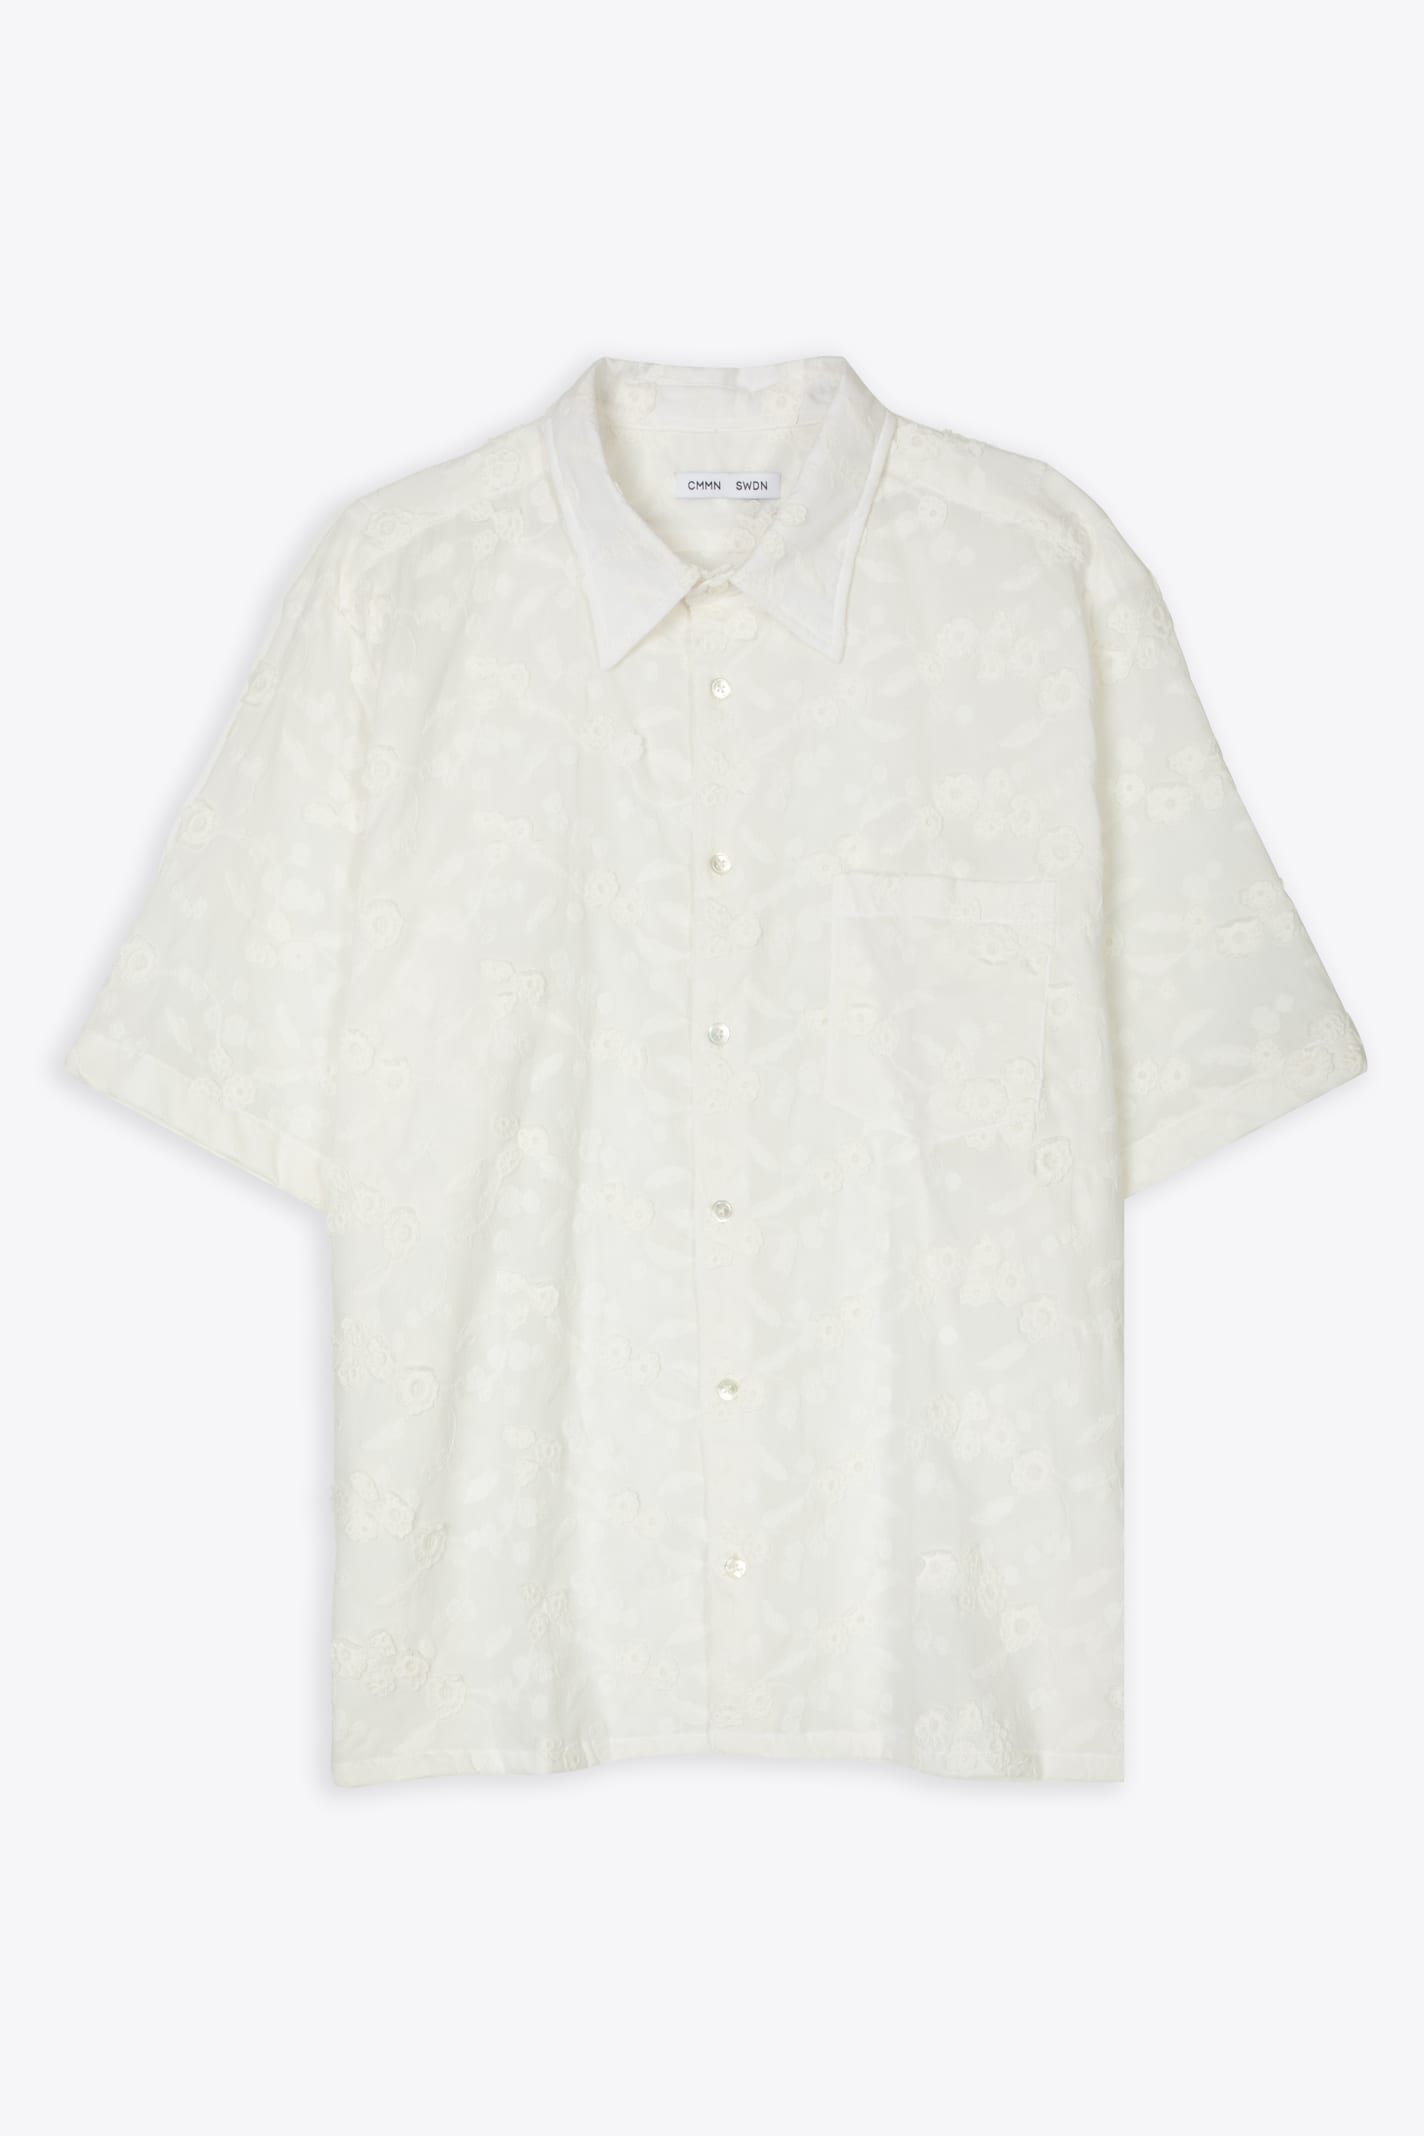 CMMN SWDN SHORT SLEEVE BUTTON UP SHIRT CUT IN A BOXY FIT WHITE COTTON SHIRT WITH FLOWER EMBROIDERY - NIELS